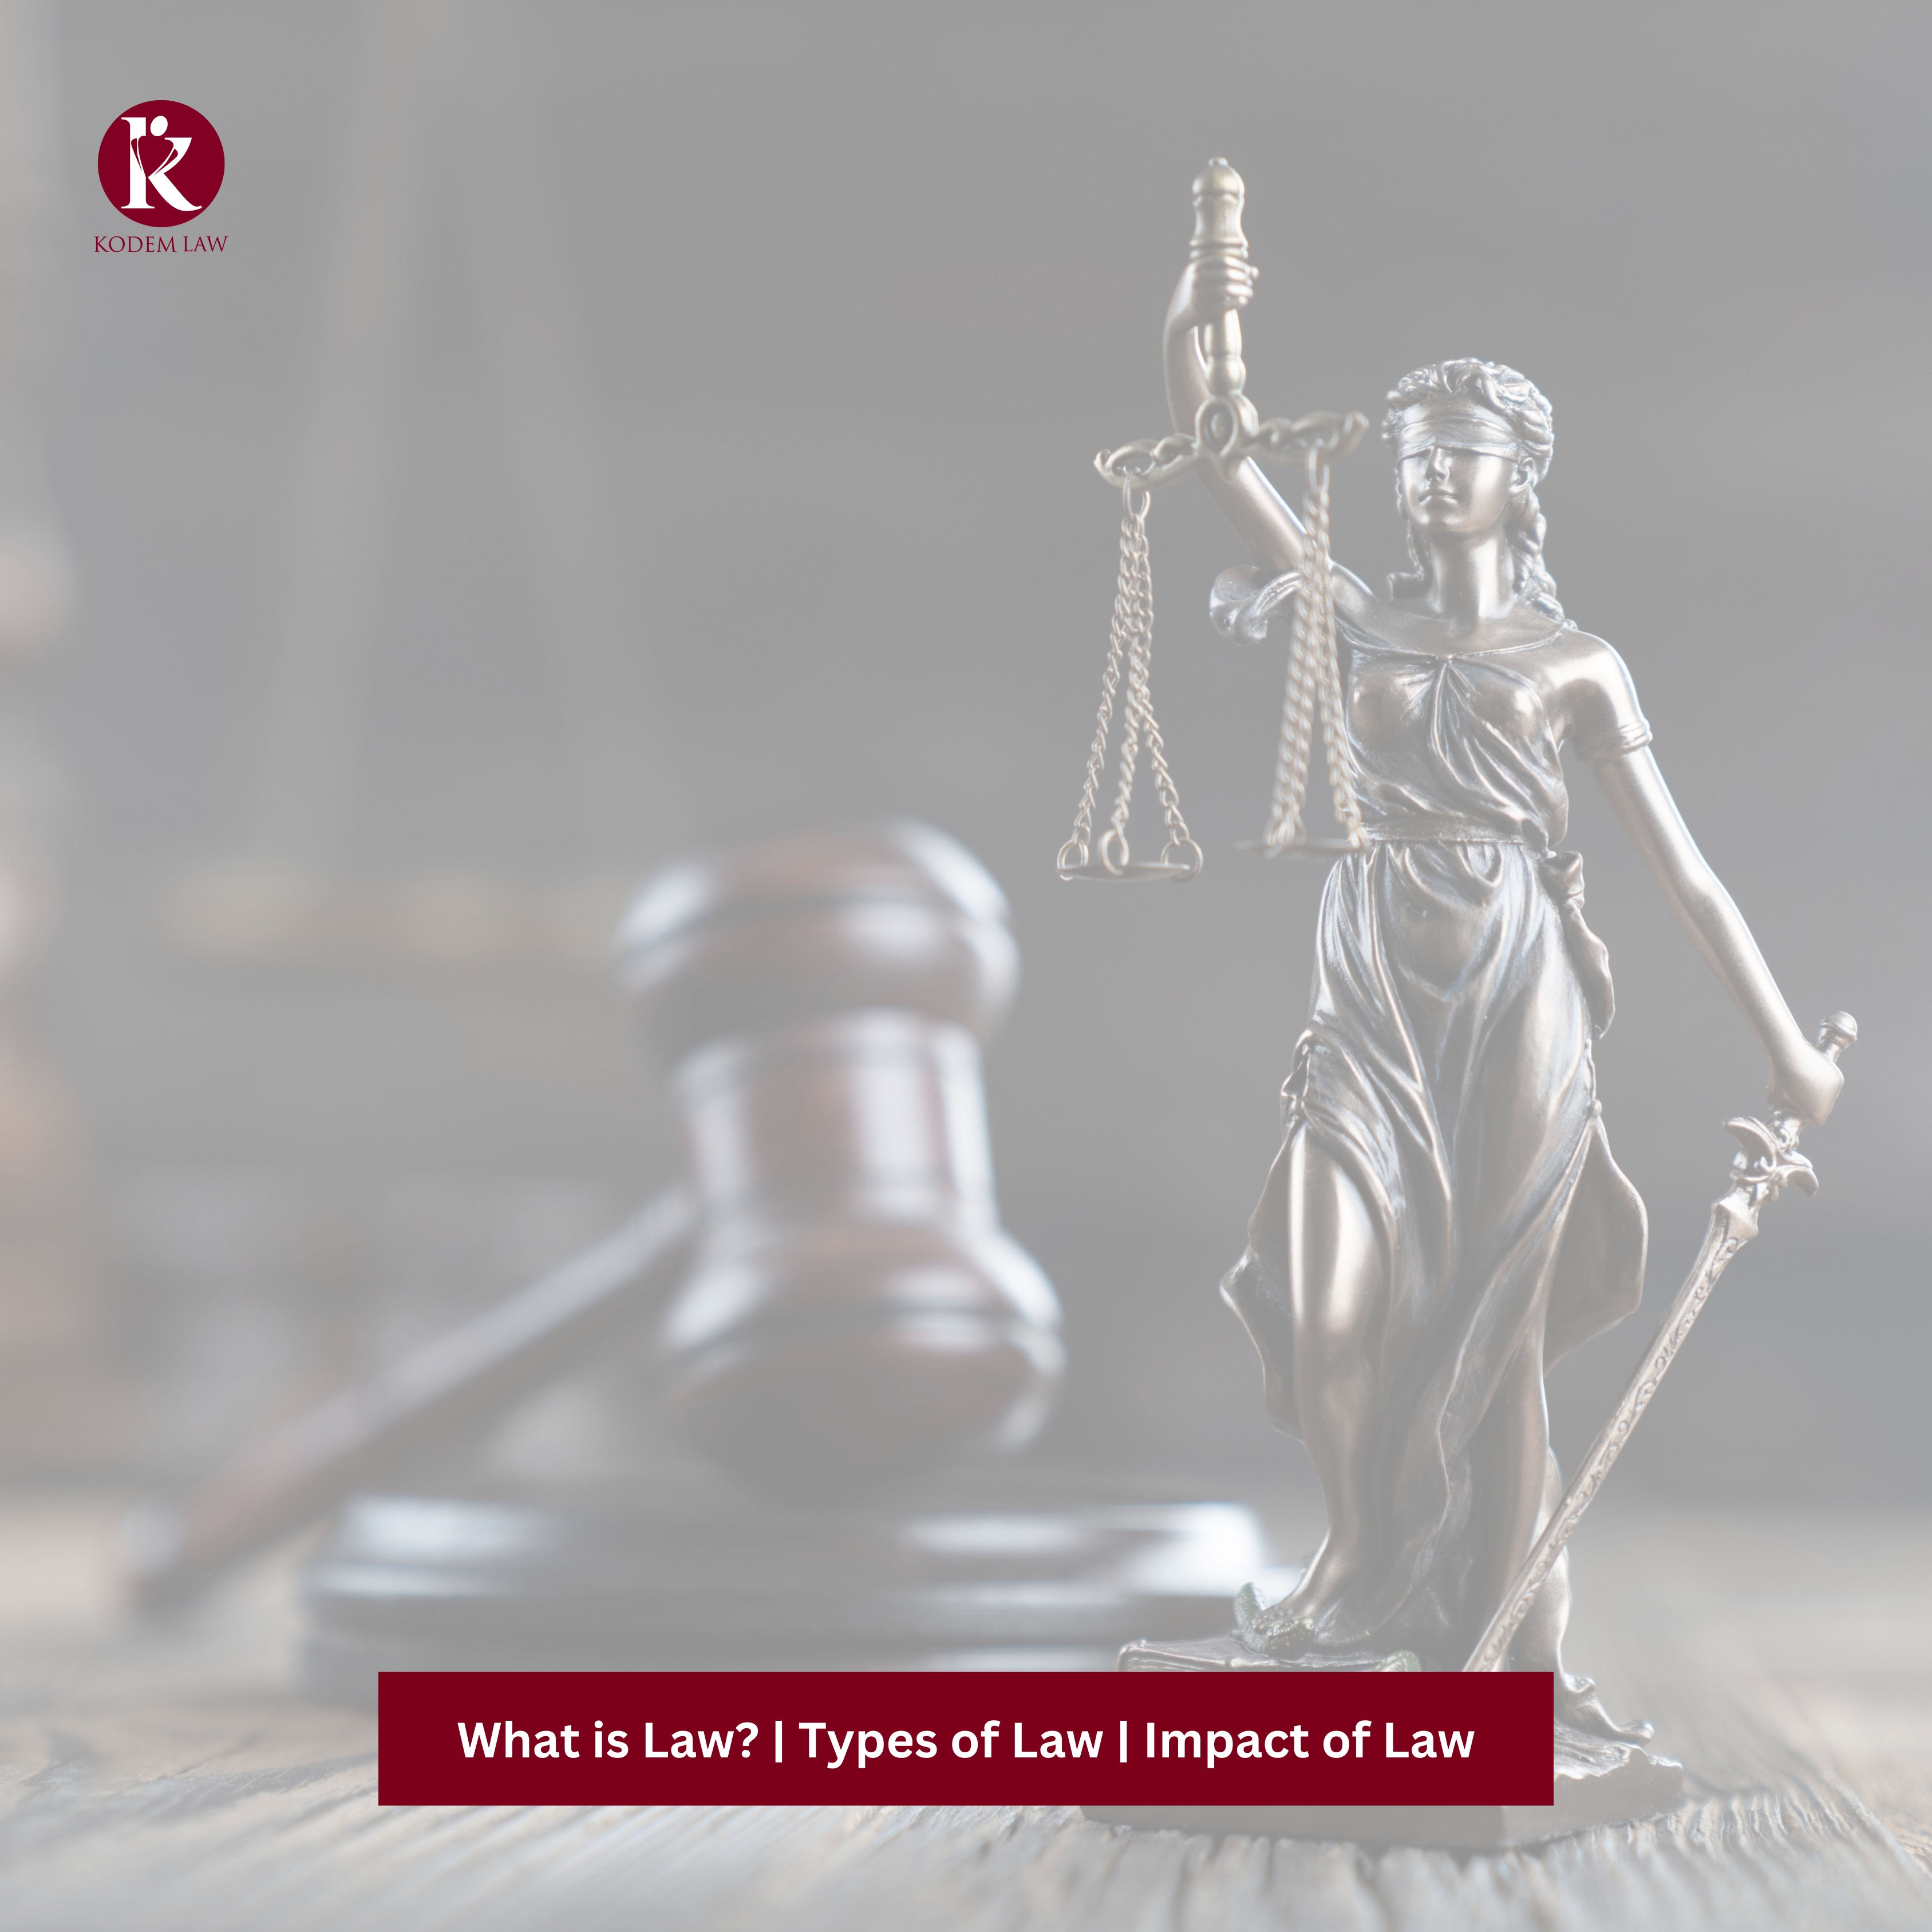 What is Law? | Types of Law | Impact of Law